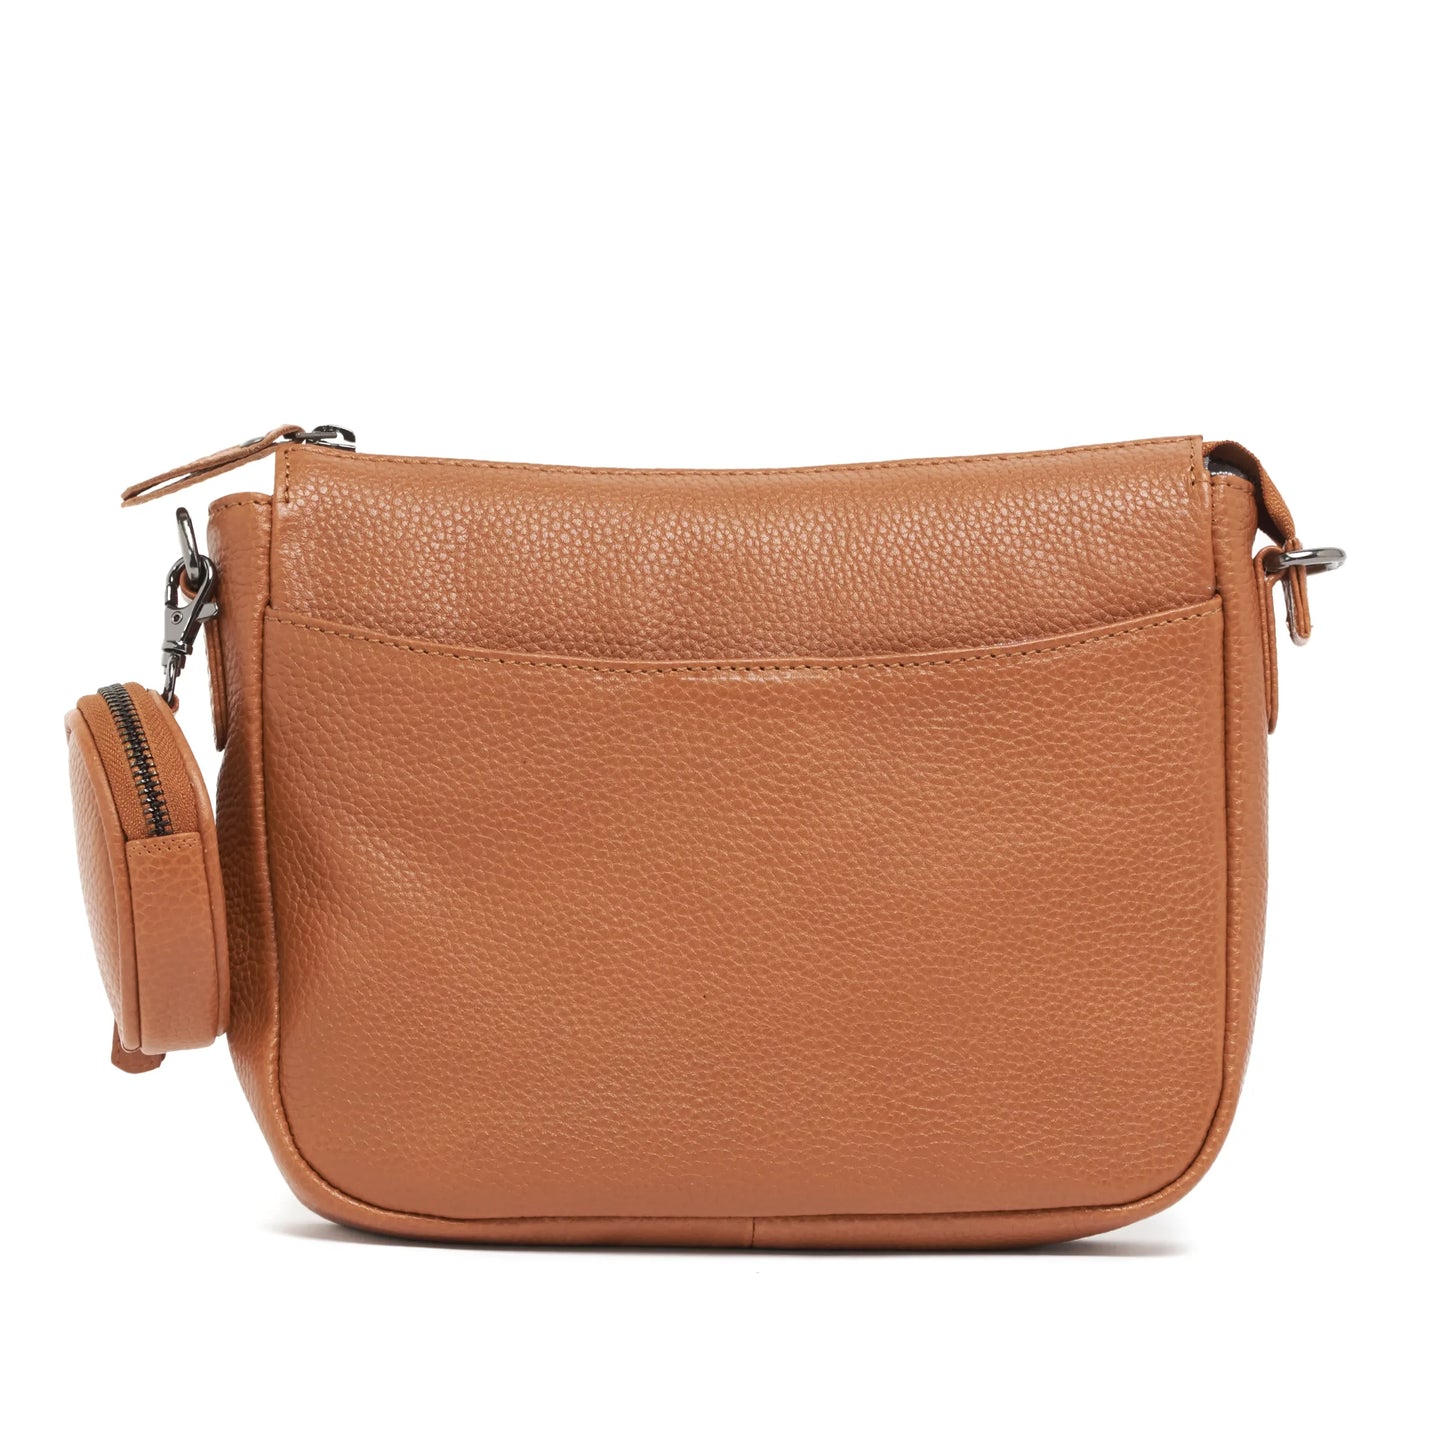 Rugged Hide RH-4916 Sienna Shoulder and Cross Body Leather Bag